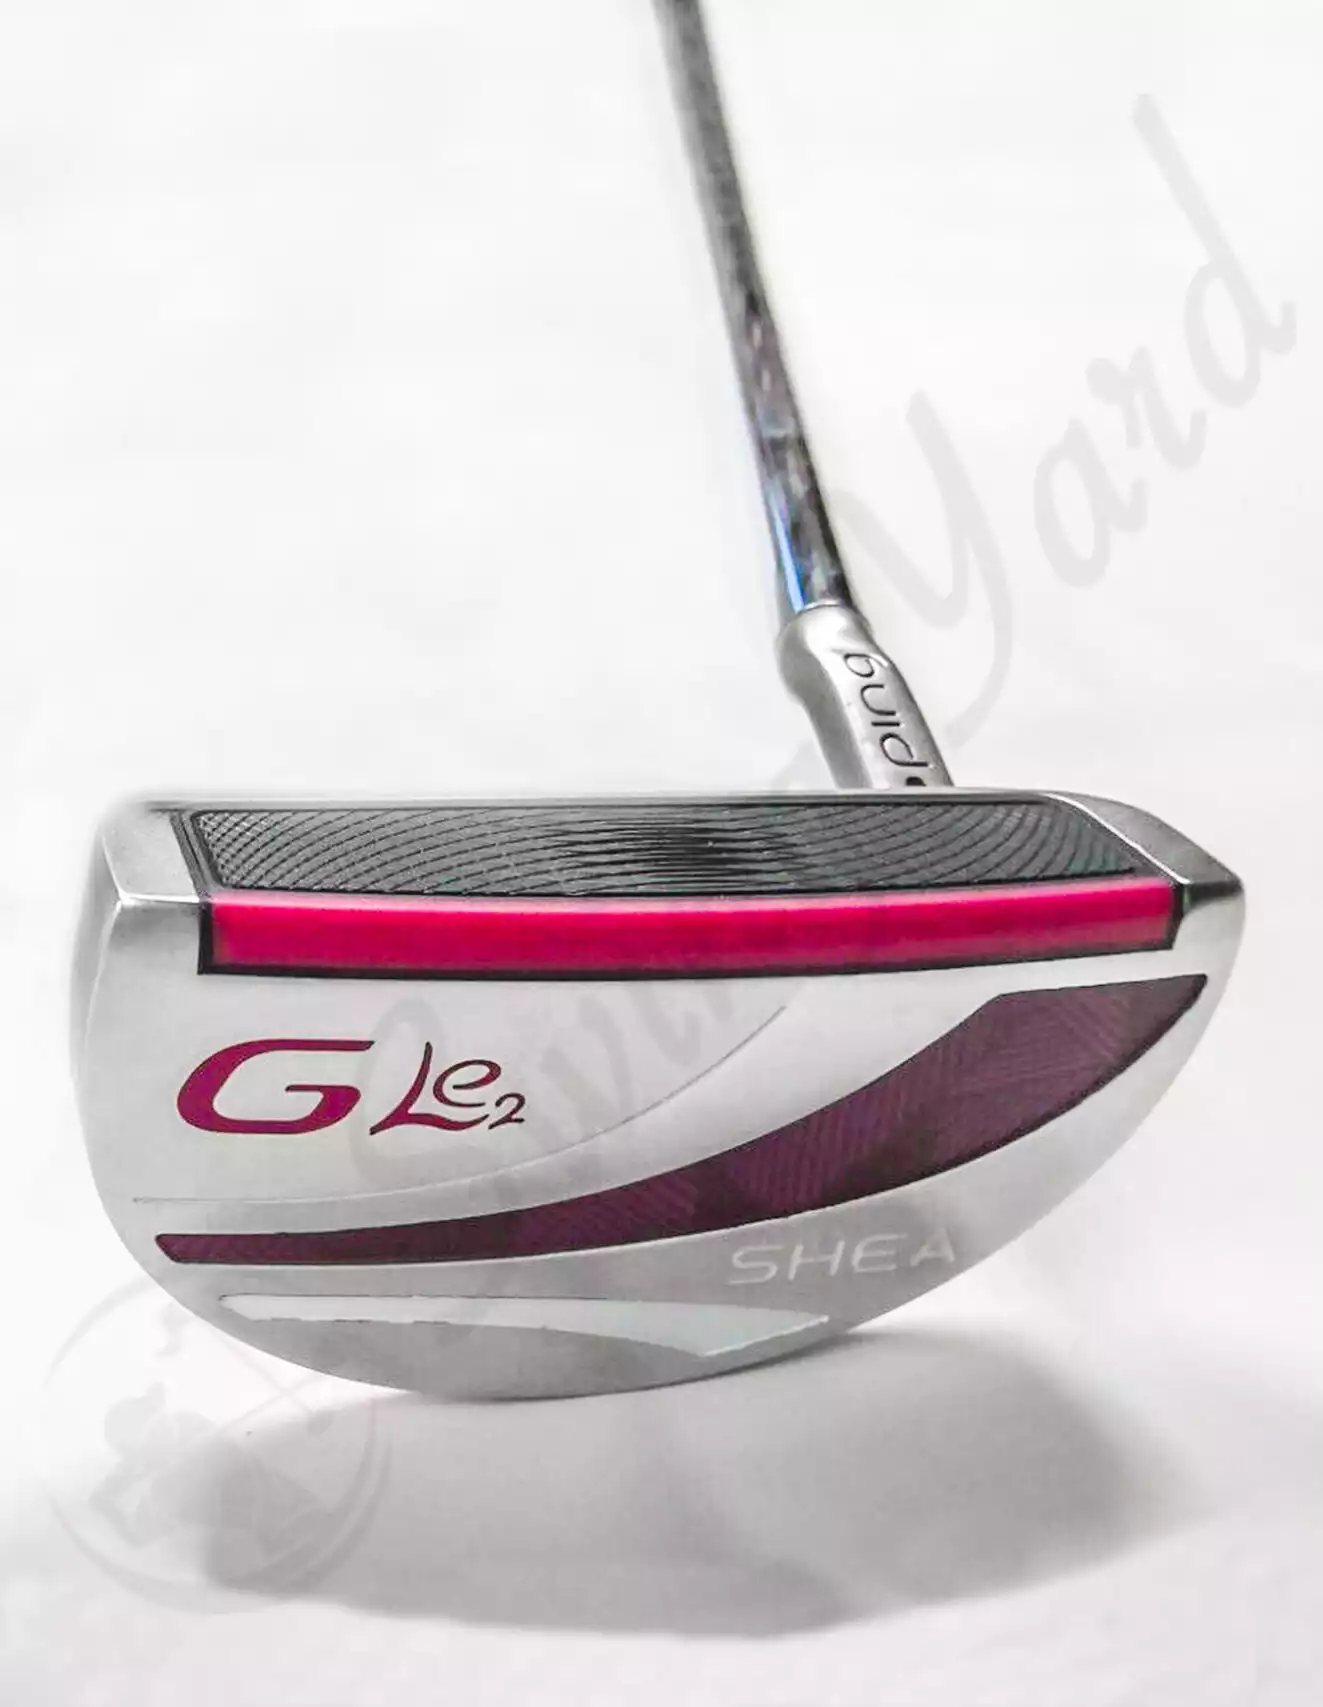 Ping G Le 2 Putter